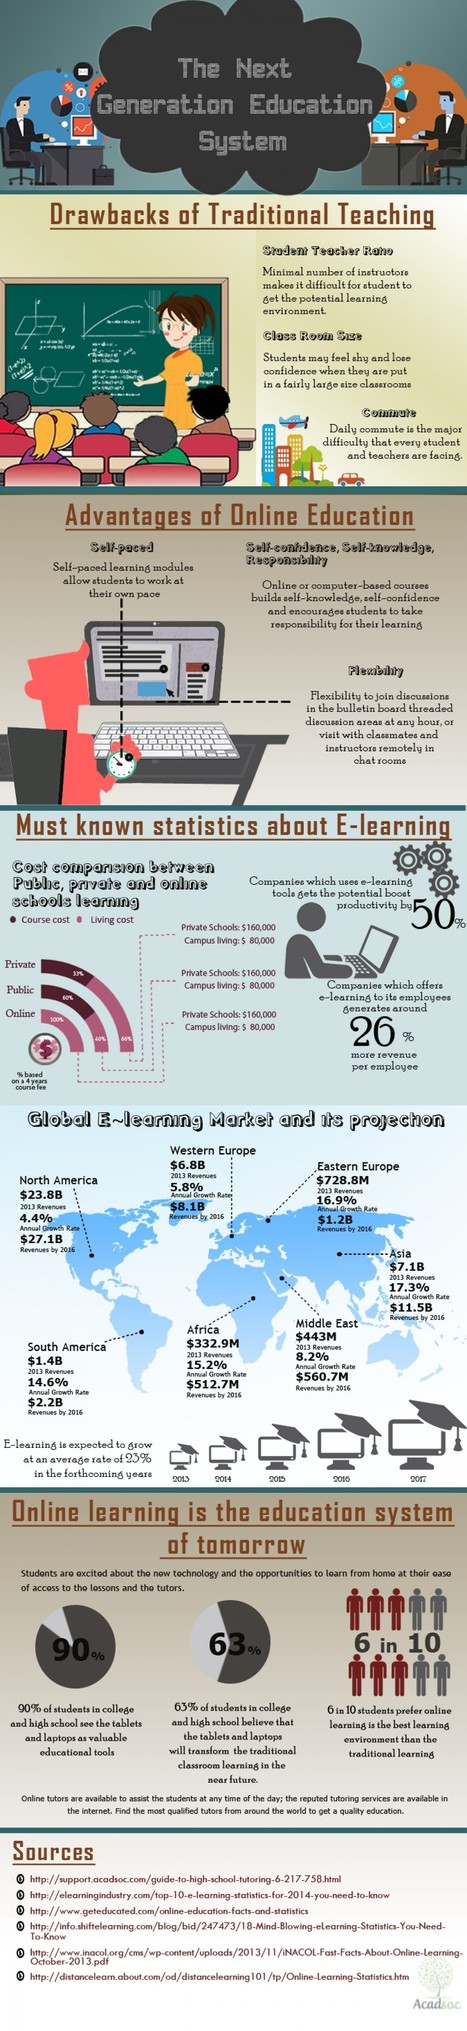 The next generation of education system [Infographic] | E-Learning-Inclusivo (Mashup) | Scoop.it